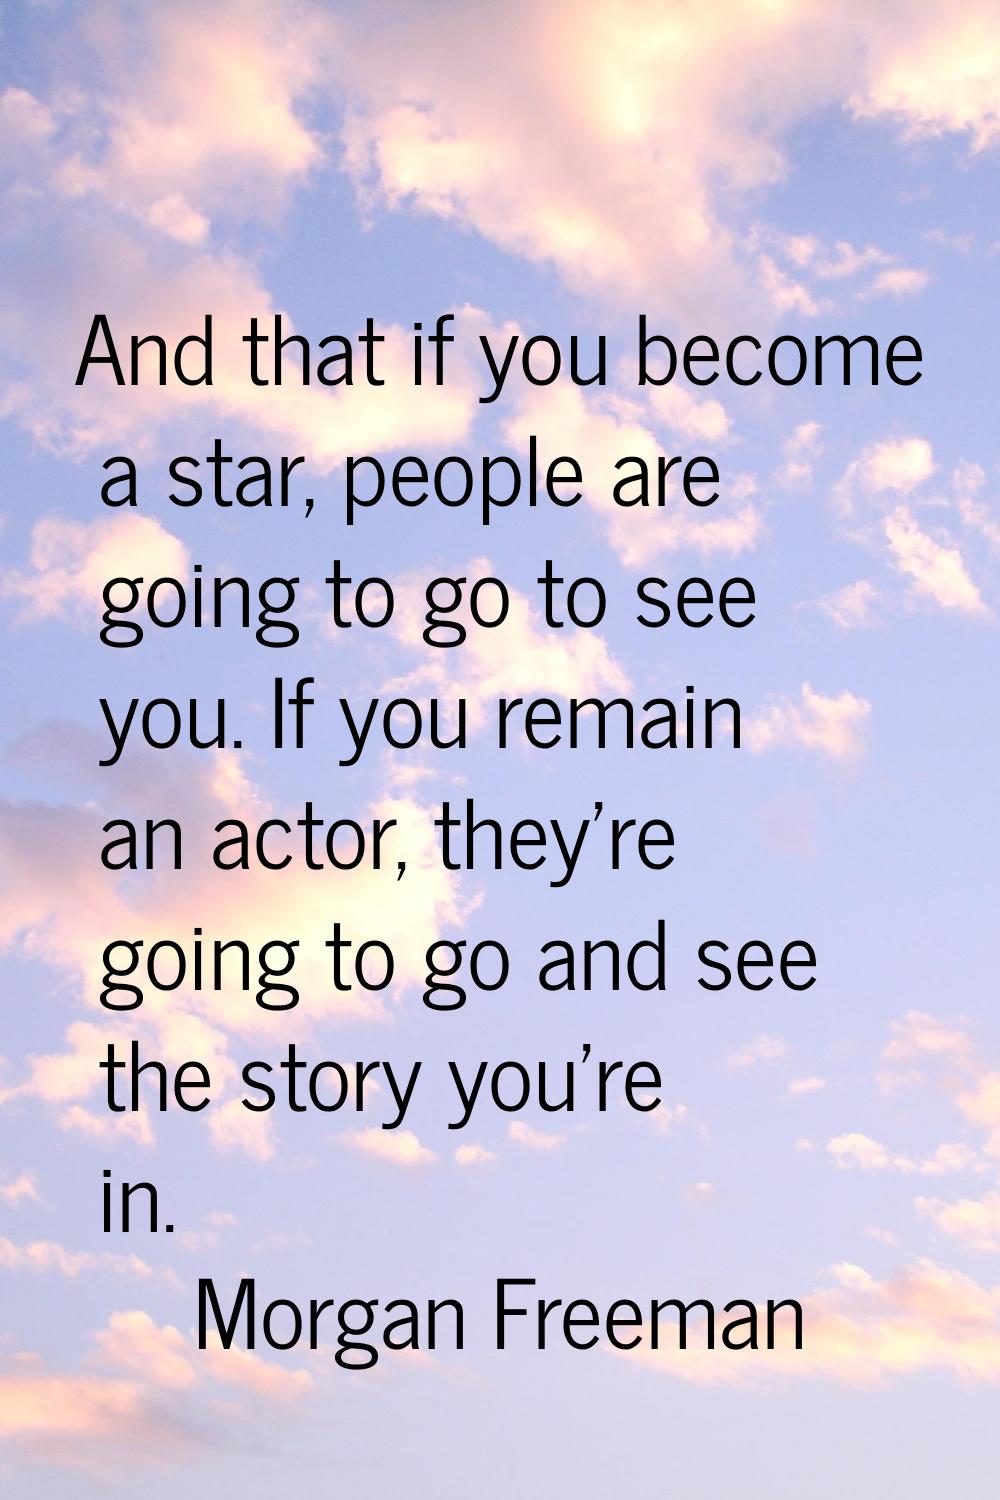 And that if you become a star, people are going to go to see you. If you remain an actor, they're g